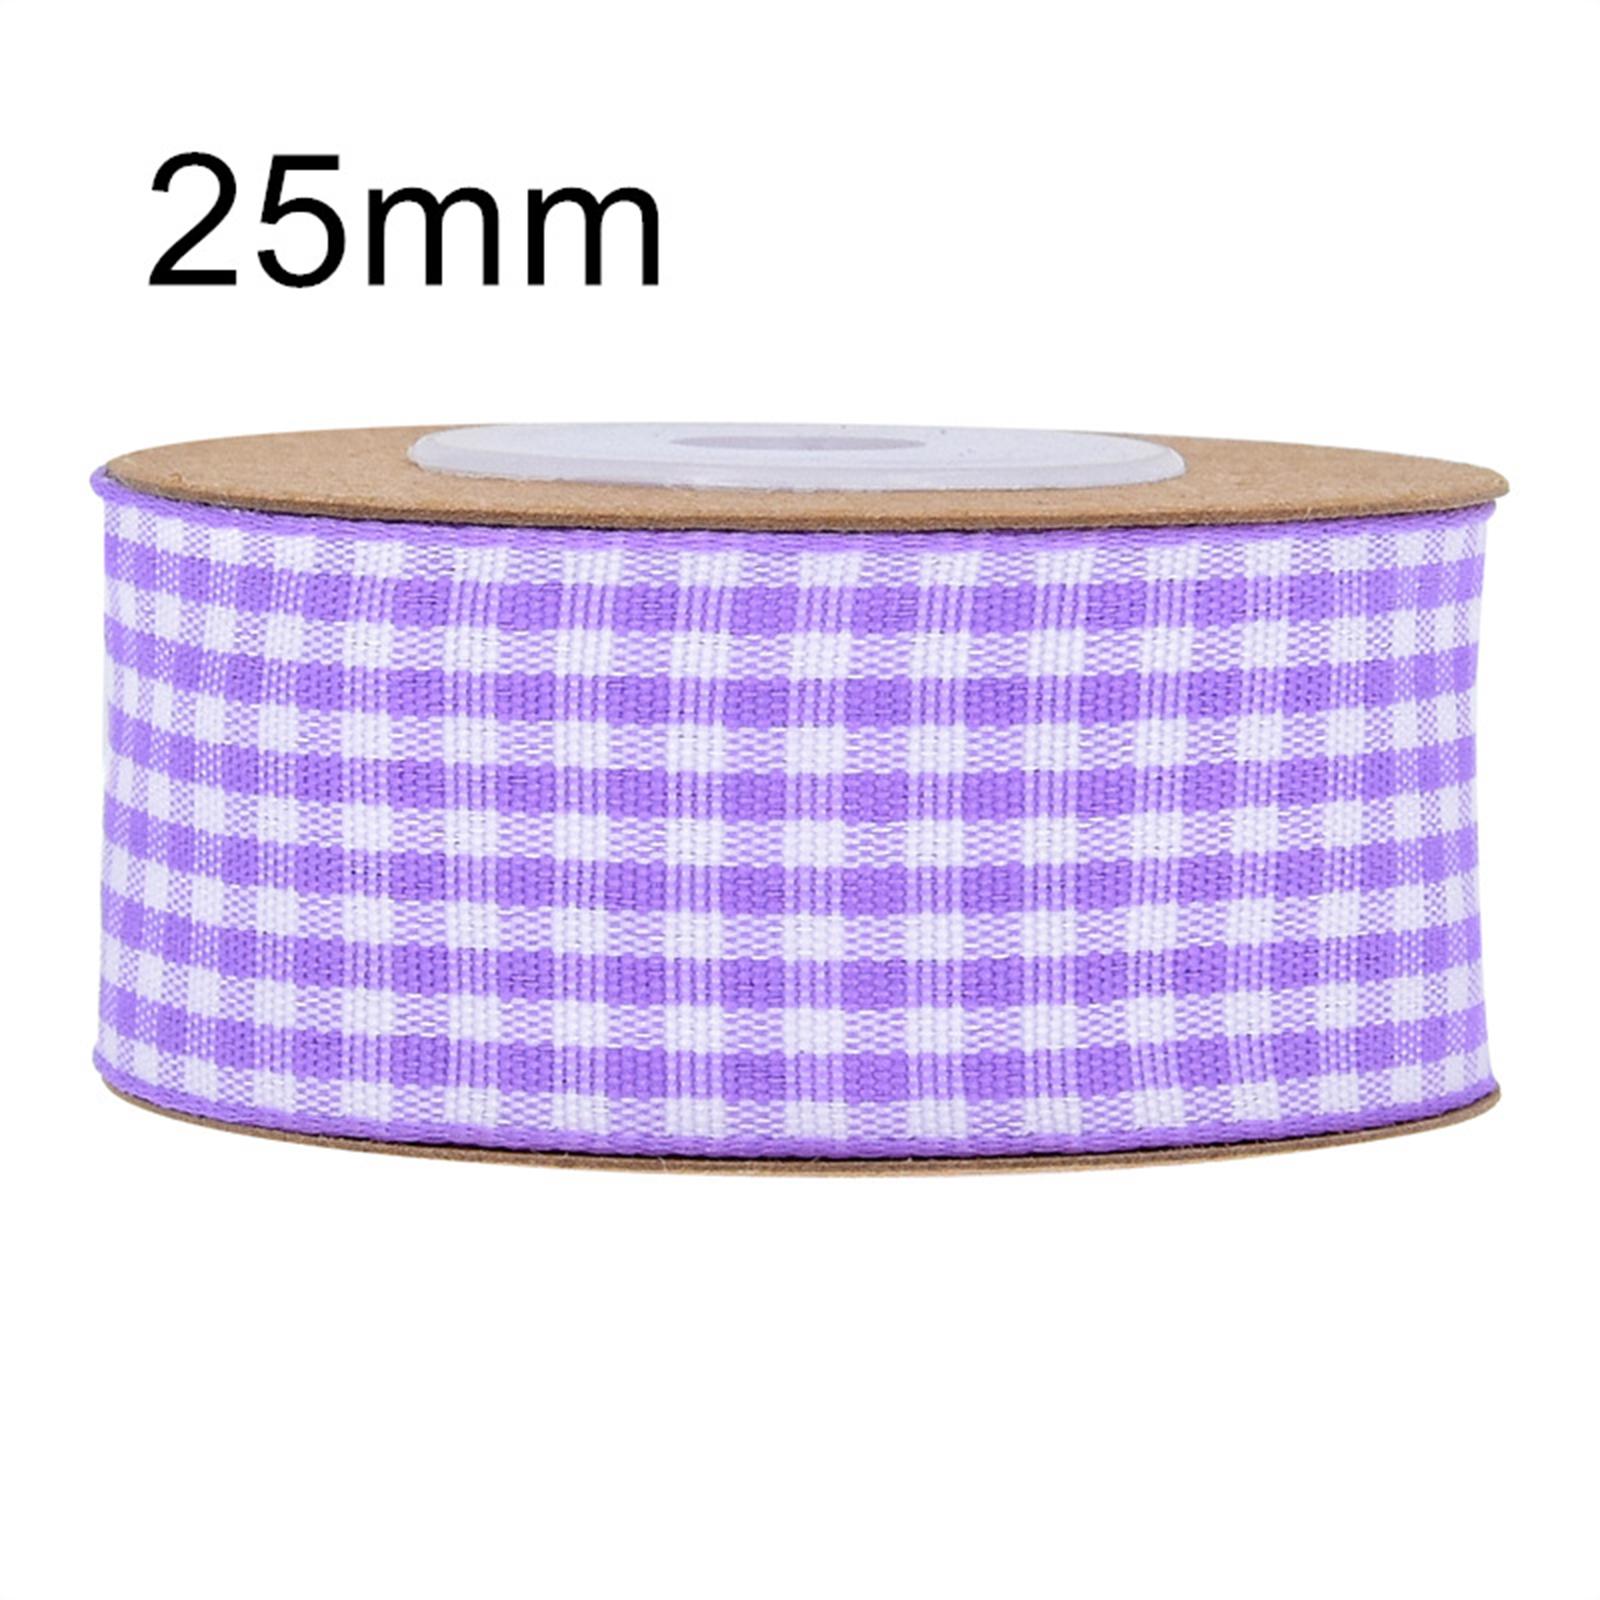 8 Rolls Plaid Ribbons checked 1 inch 8 Colors for Craft Decor Swag